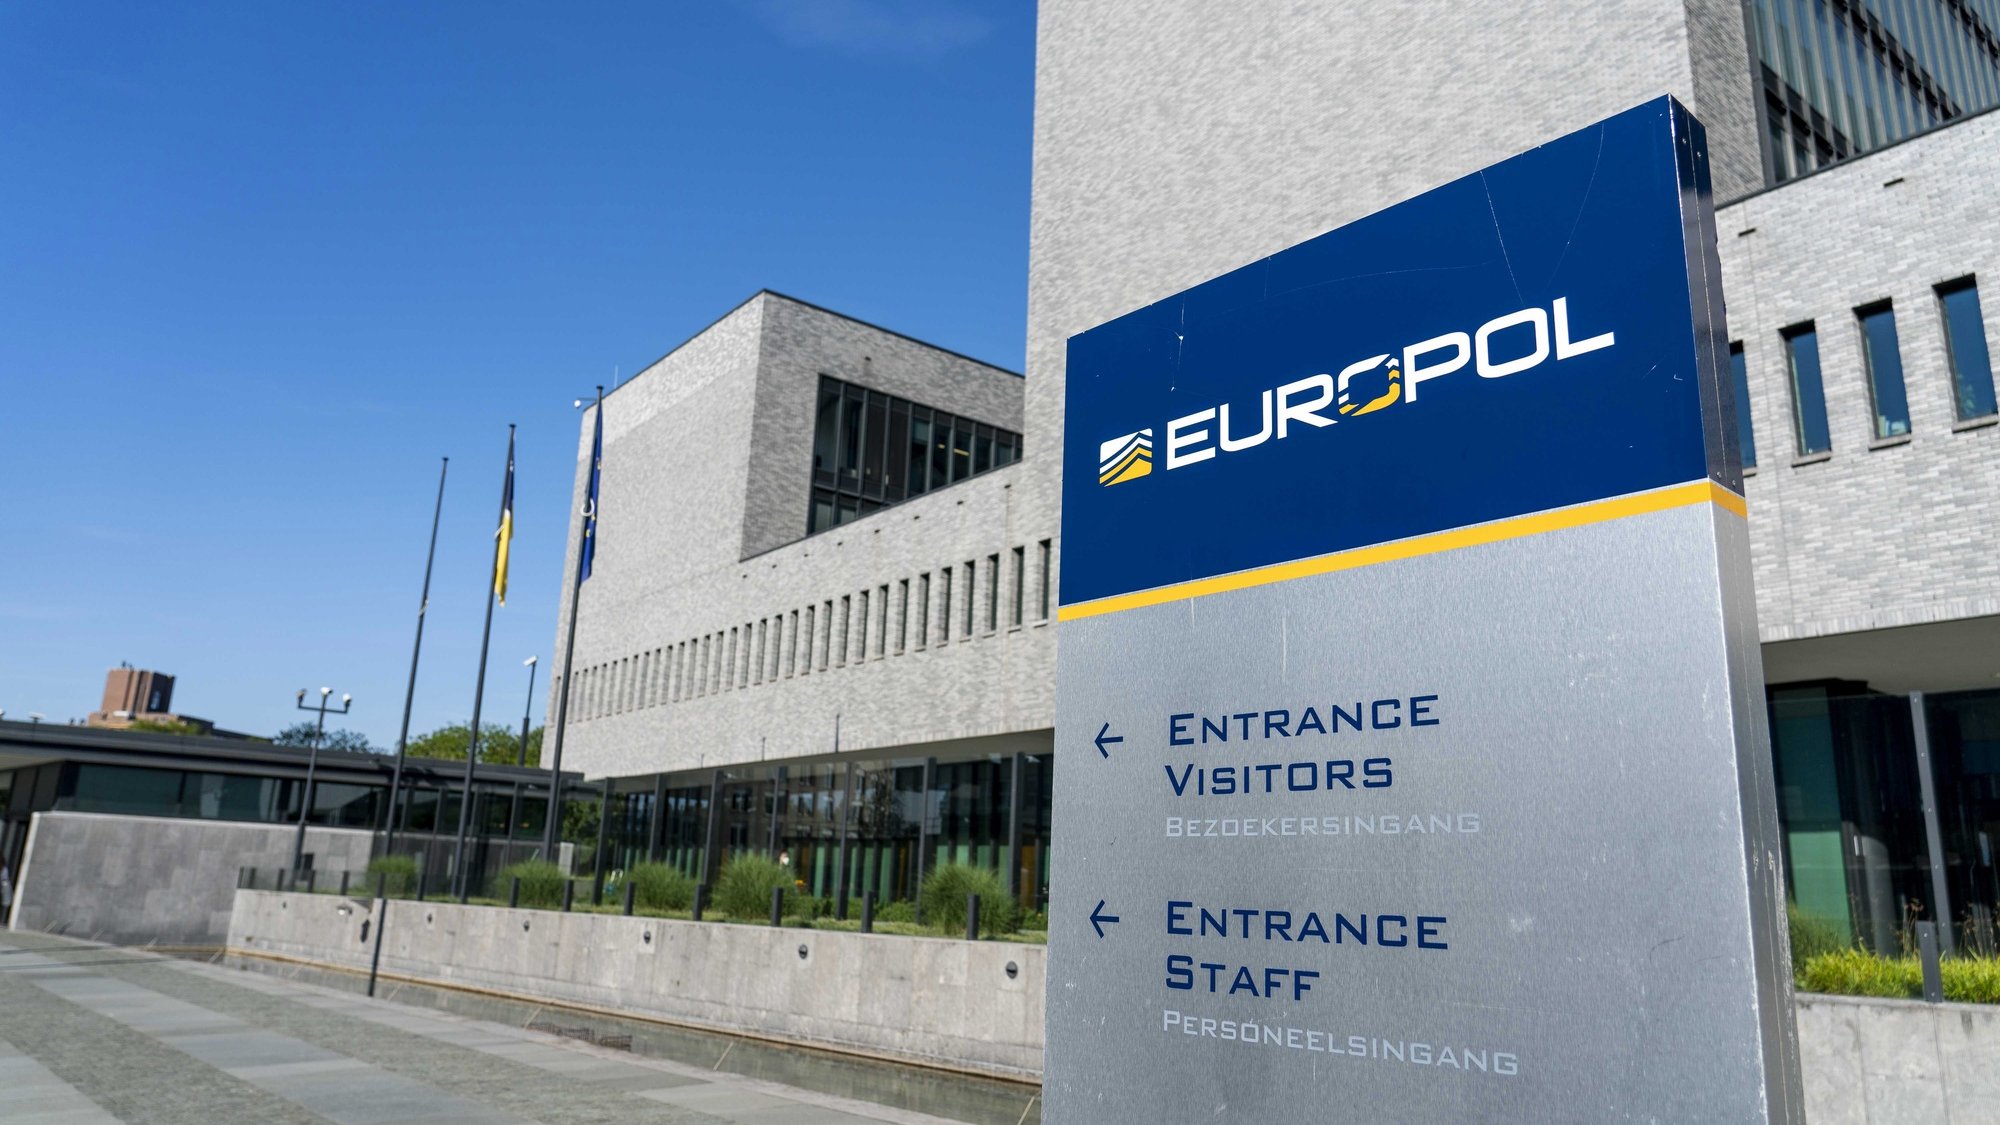 epa09254493 An exterior view of the Europol headquarters in The Hague, the Netherlands, 08 June 2021, prior to a Europol&#039;s press conference on one of the largest and most sophisticated law enforcement operations to date in the fight against encrypted criminal activities that resulted in the arrest of more than 800 people. According to a statement by the Europol, the US Federal Bureau of Investigation (FBI), the Dutch National Police, the Swedish Police Authority, in cooperation with the US Drug Enforcement Administration (DEA) and 16 other countries have carried out the investigations with the support of Europol.  EPA/JERRY LAMPEN